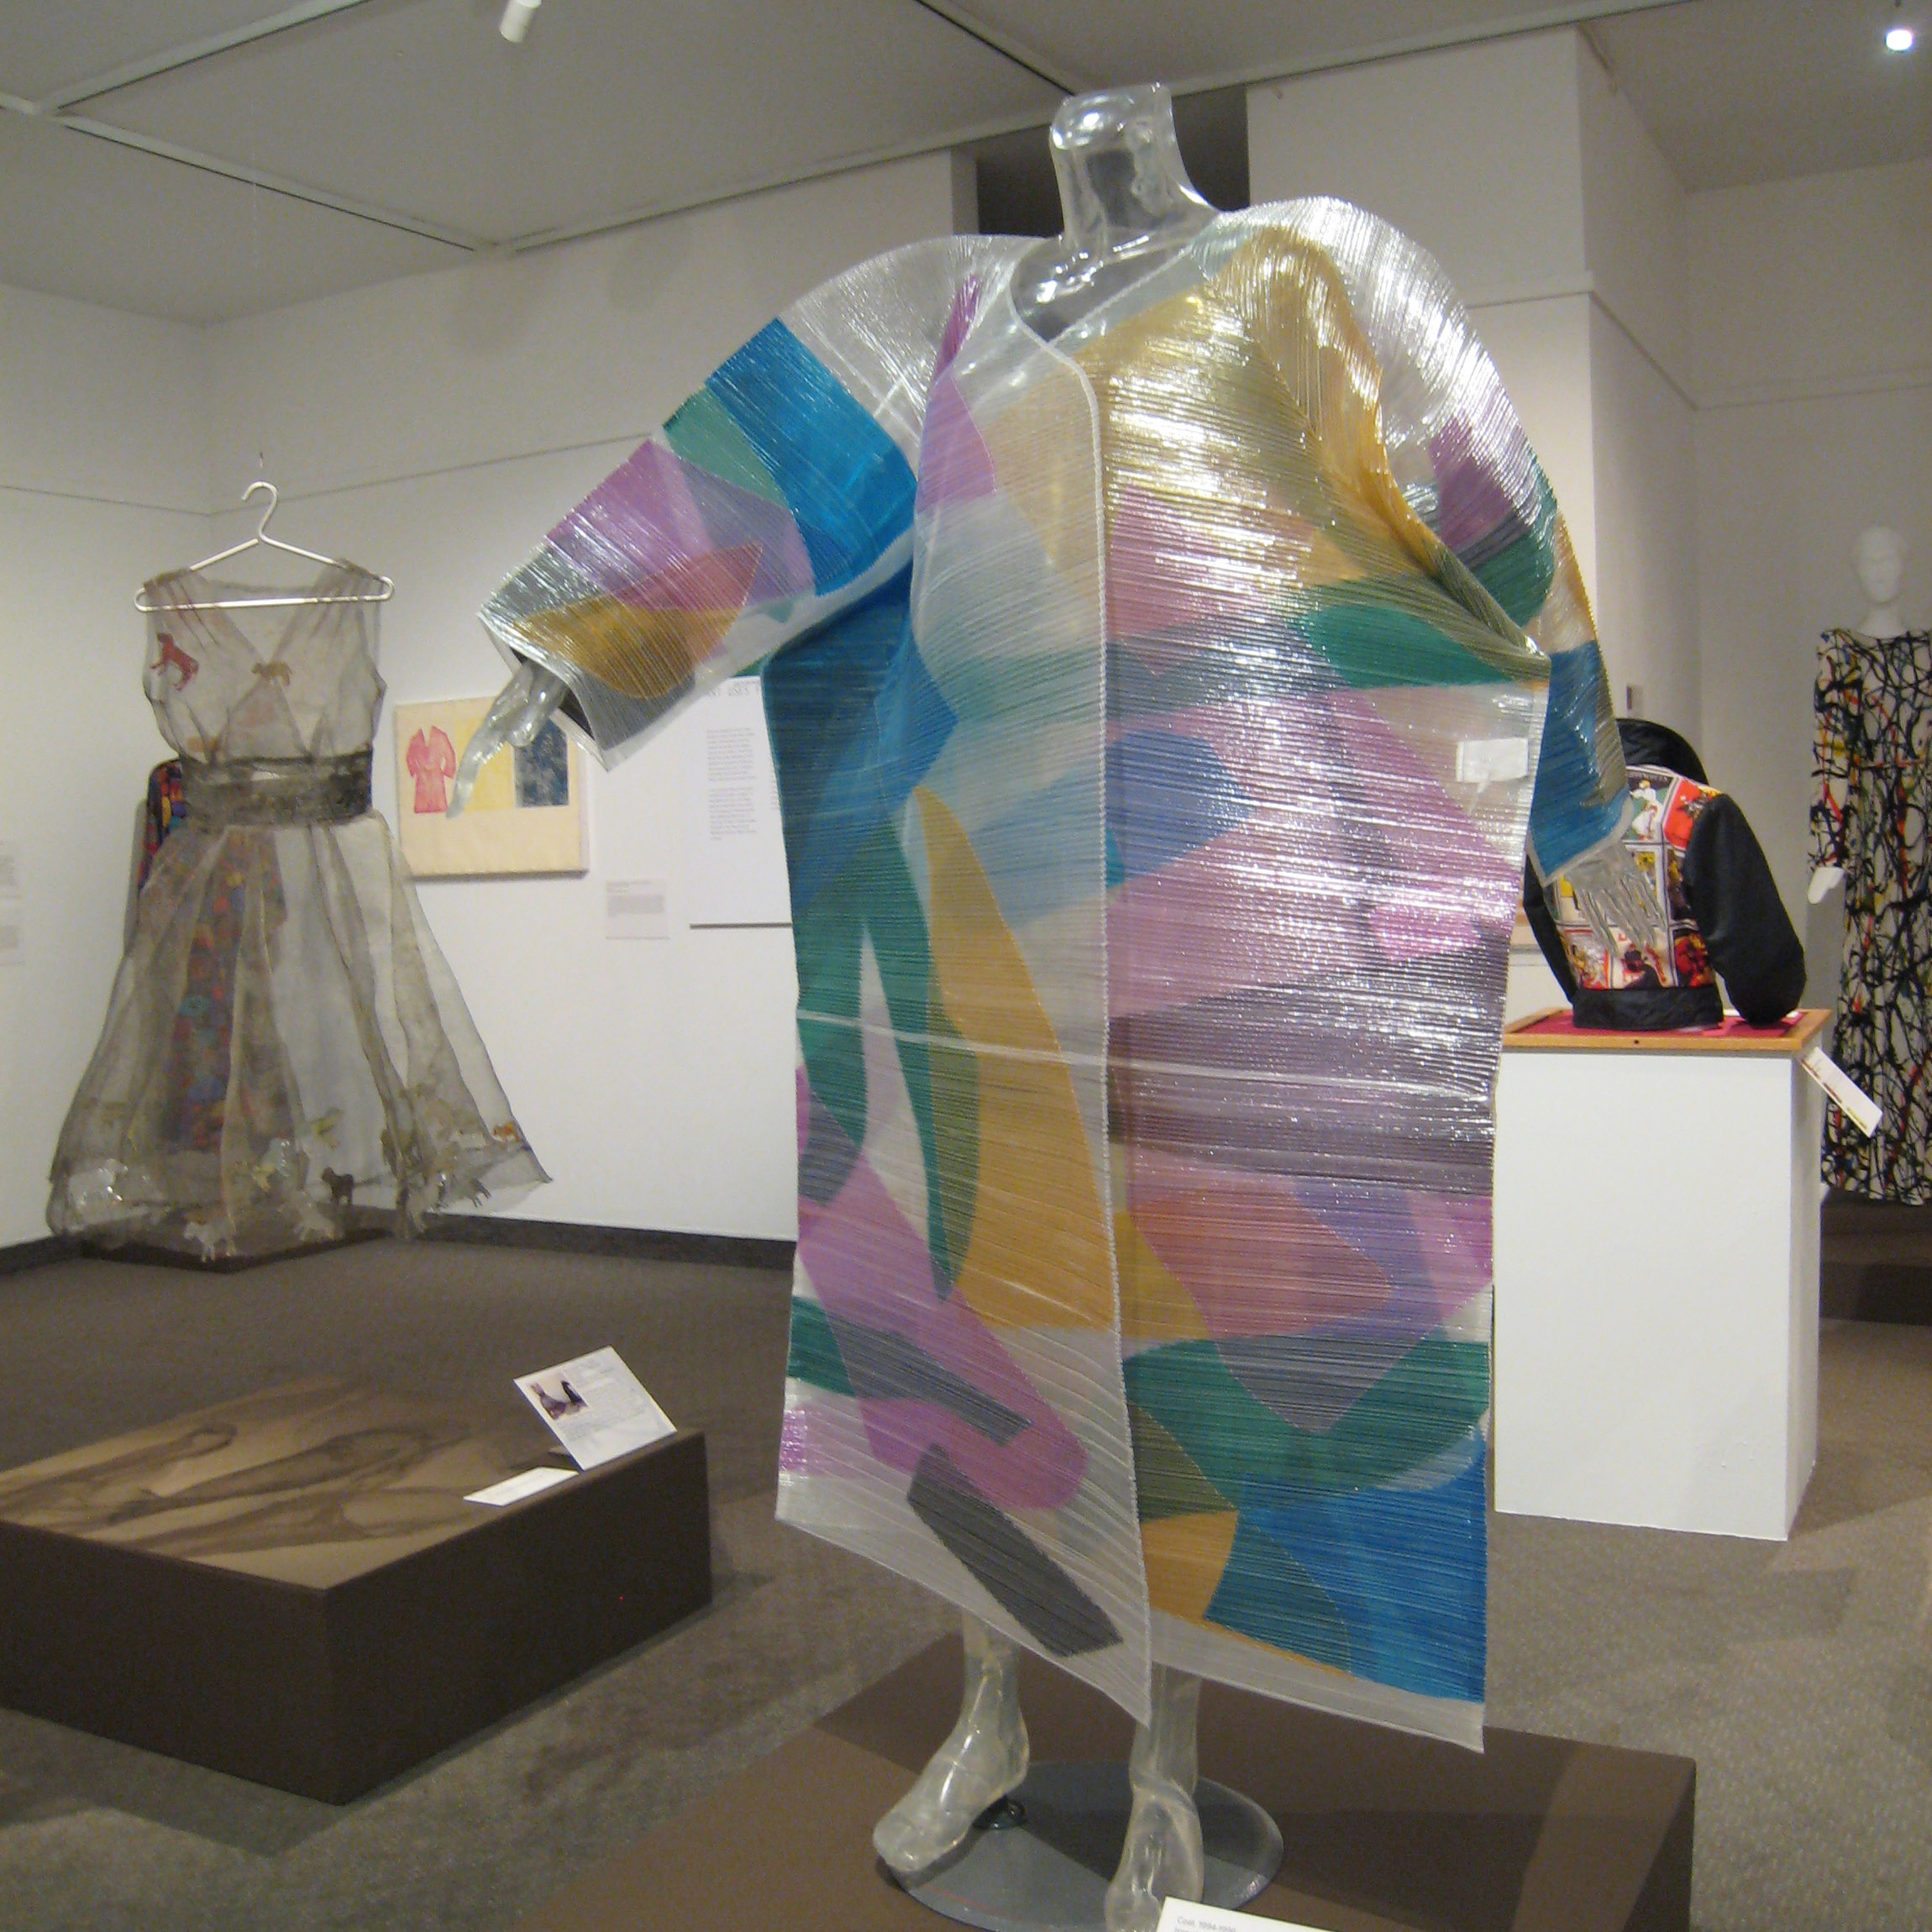 Intersections: Where Art Meets Fashion exhibition with various artistic clothing designs on display